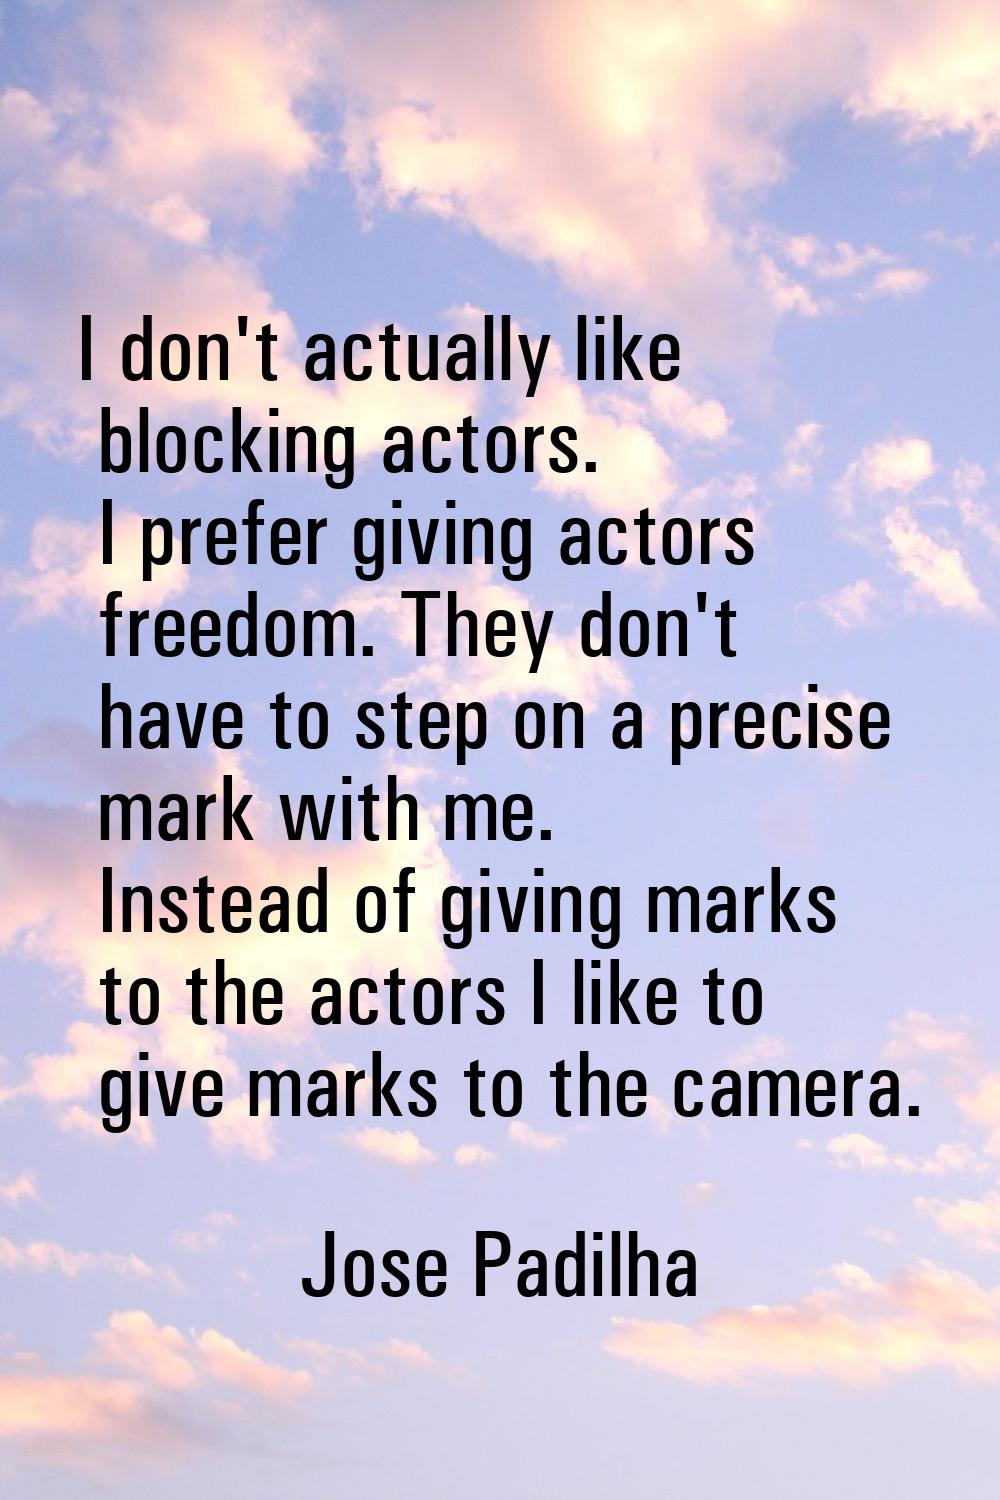 I don't actually like blocking actors. I prefer giving actors freedom. They don't have to step on a